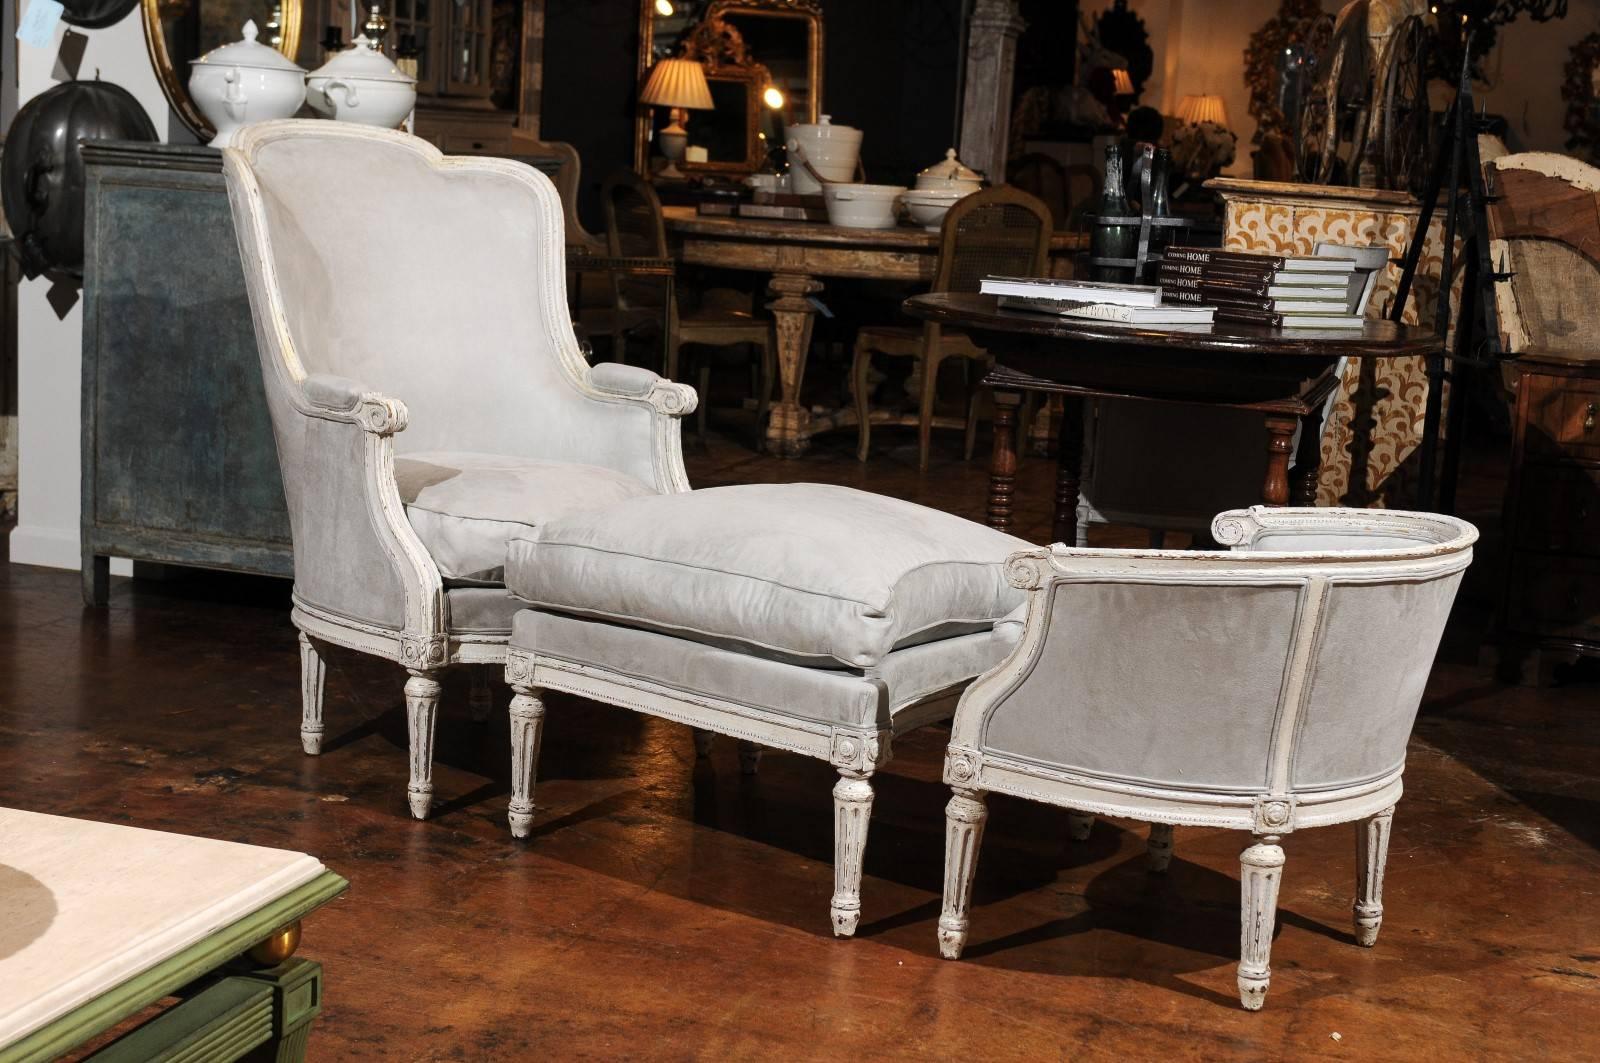 A French Louis XVI style off-white painted and re-upholstered 'Duchesse Brisée en Trois' with tall bergère, ottoman, tub chair and cushioned seats from the late 19th century. This French chaise longue features an exquisite bergère chair with curved